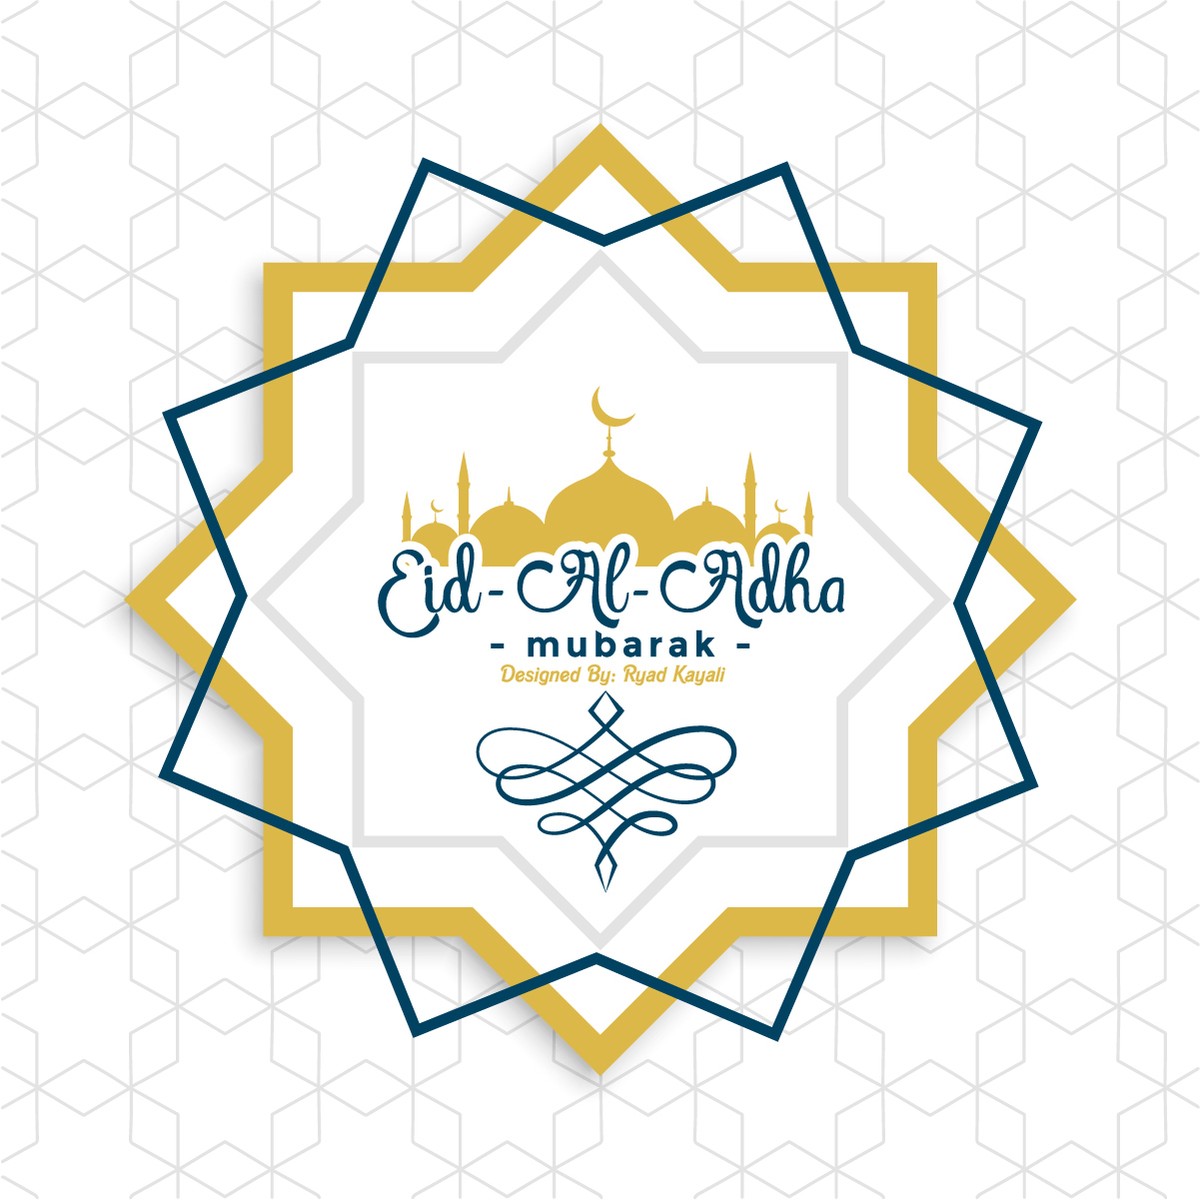 Greeting cards on the occasion of Eid al-Adha